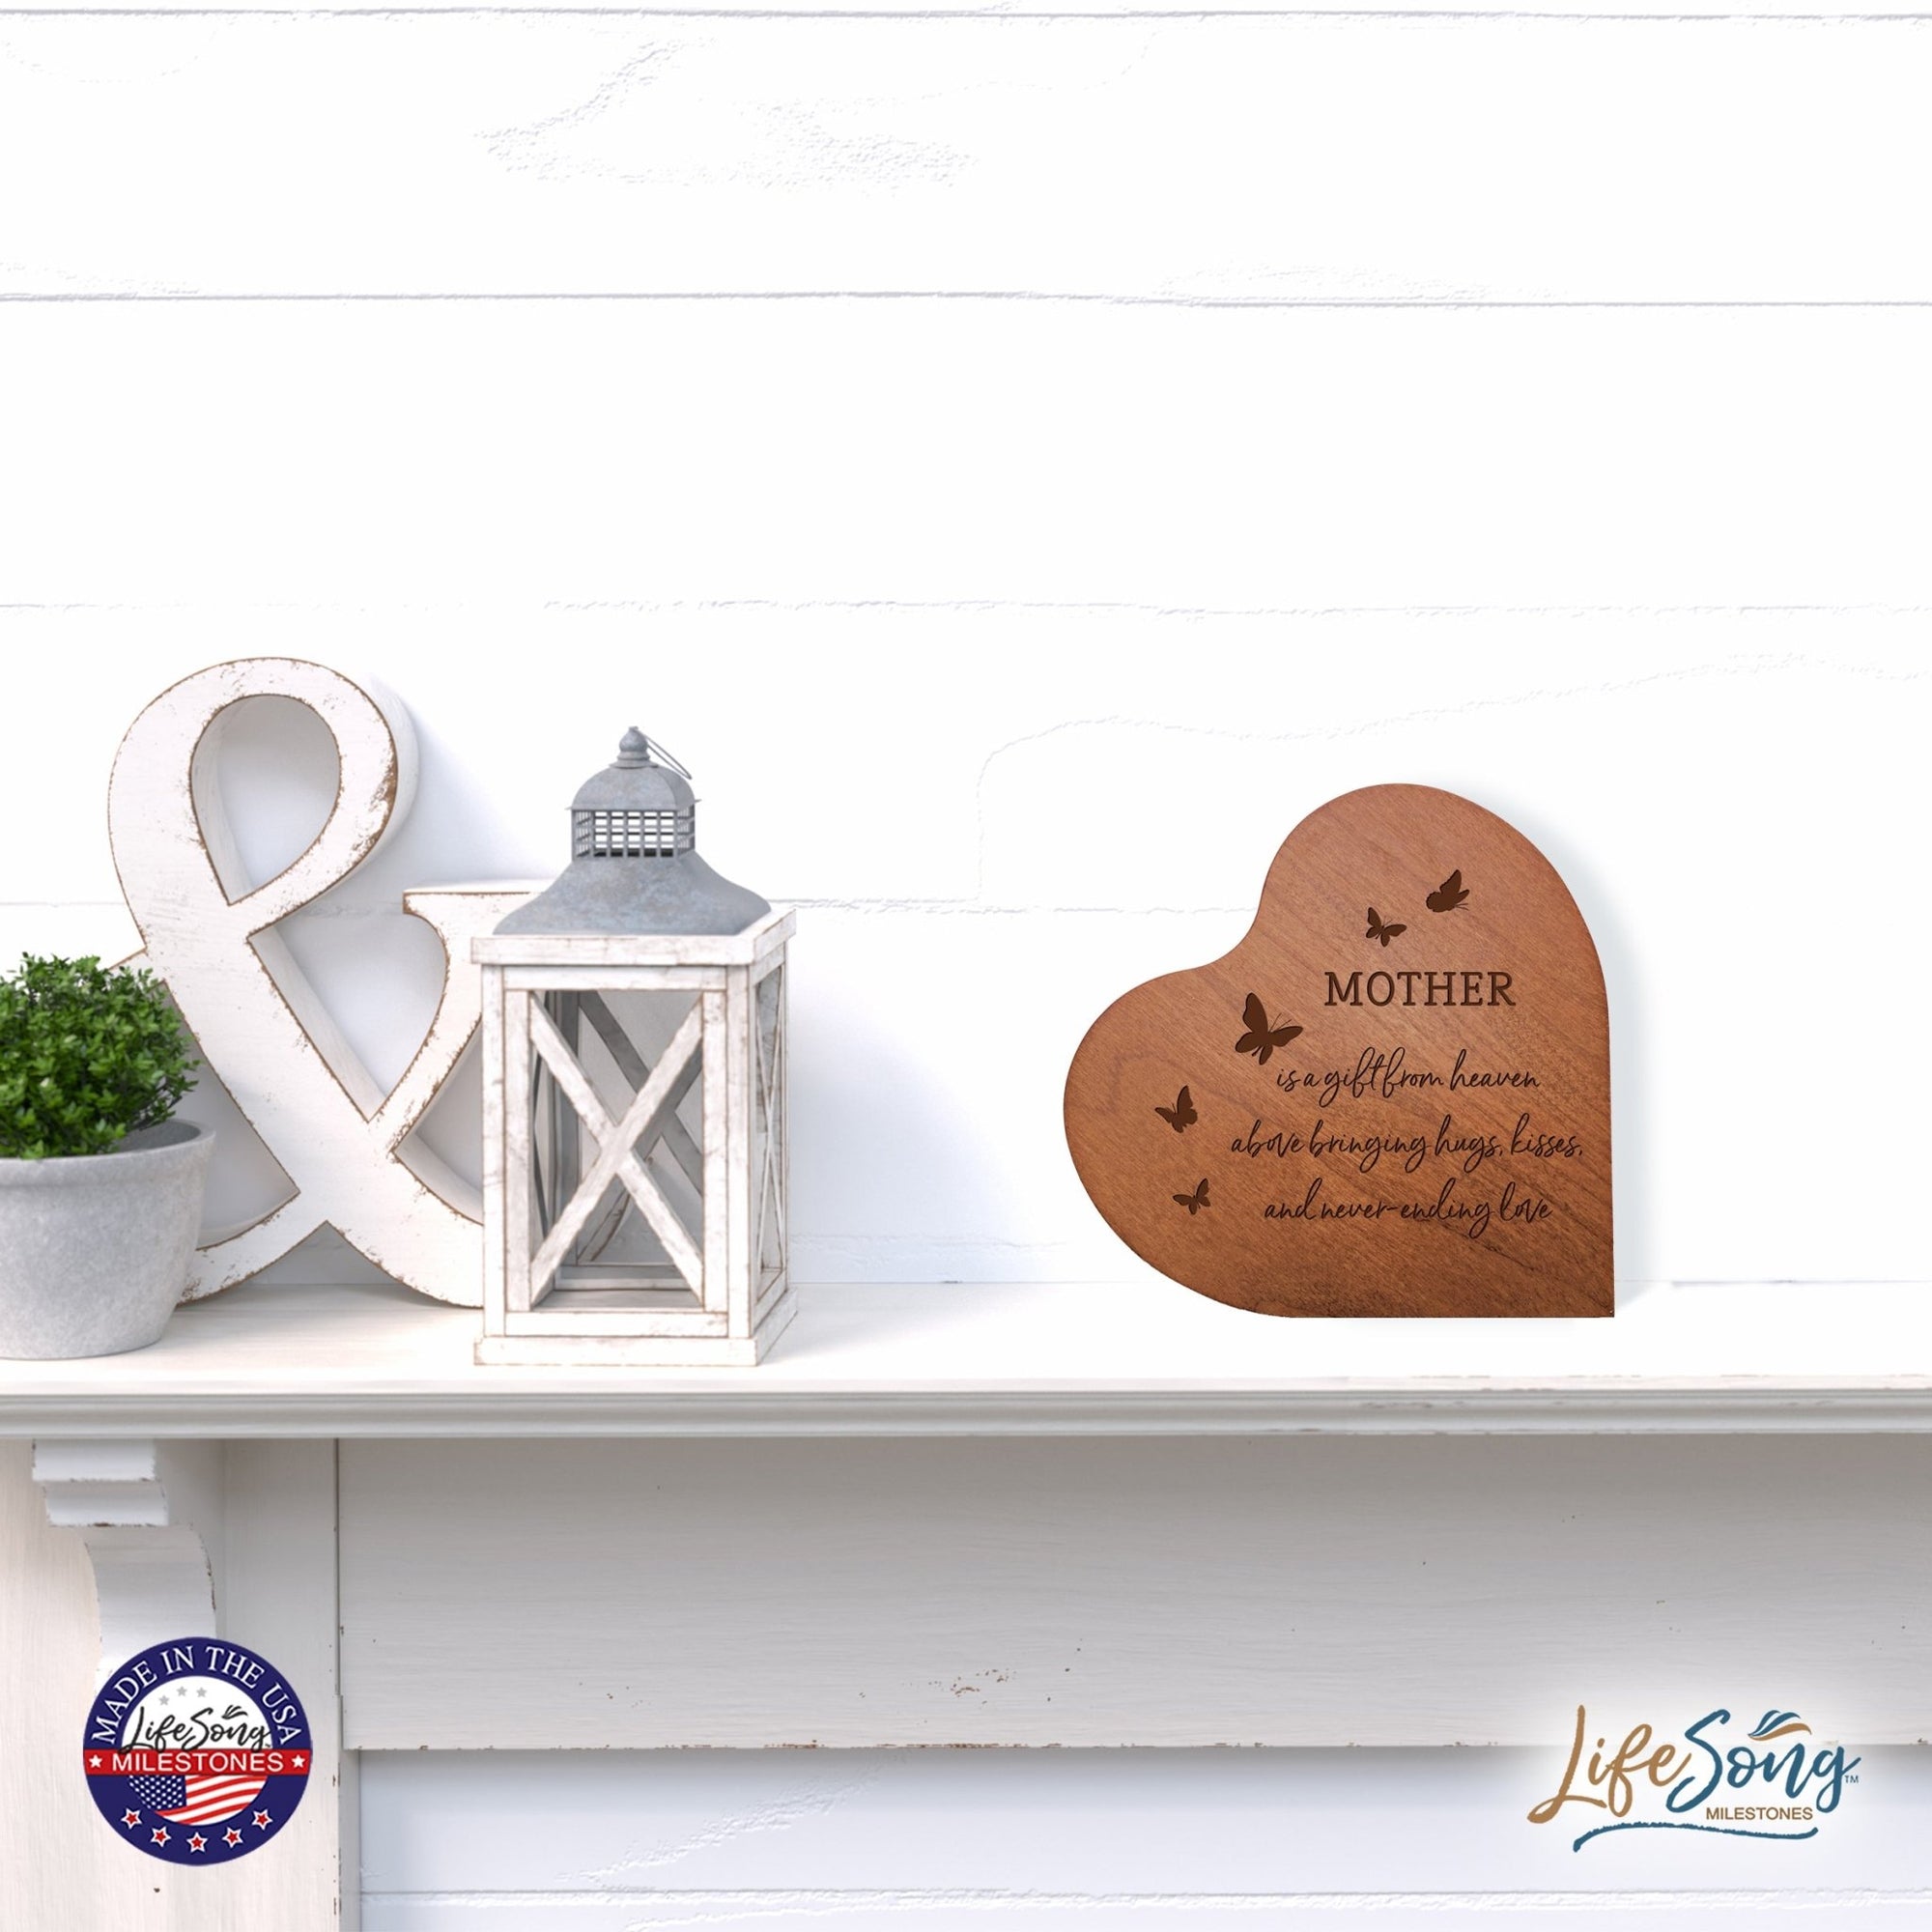 Modern Mother’s Love Solid Wood Heart Decoration With Inspirational Verse Keepsake Gift 5x5.25 - Mother Is A Gift = Never-ending Love - LifeSong Milestones